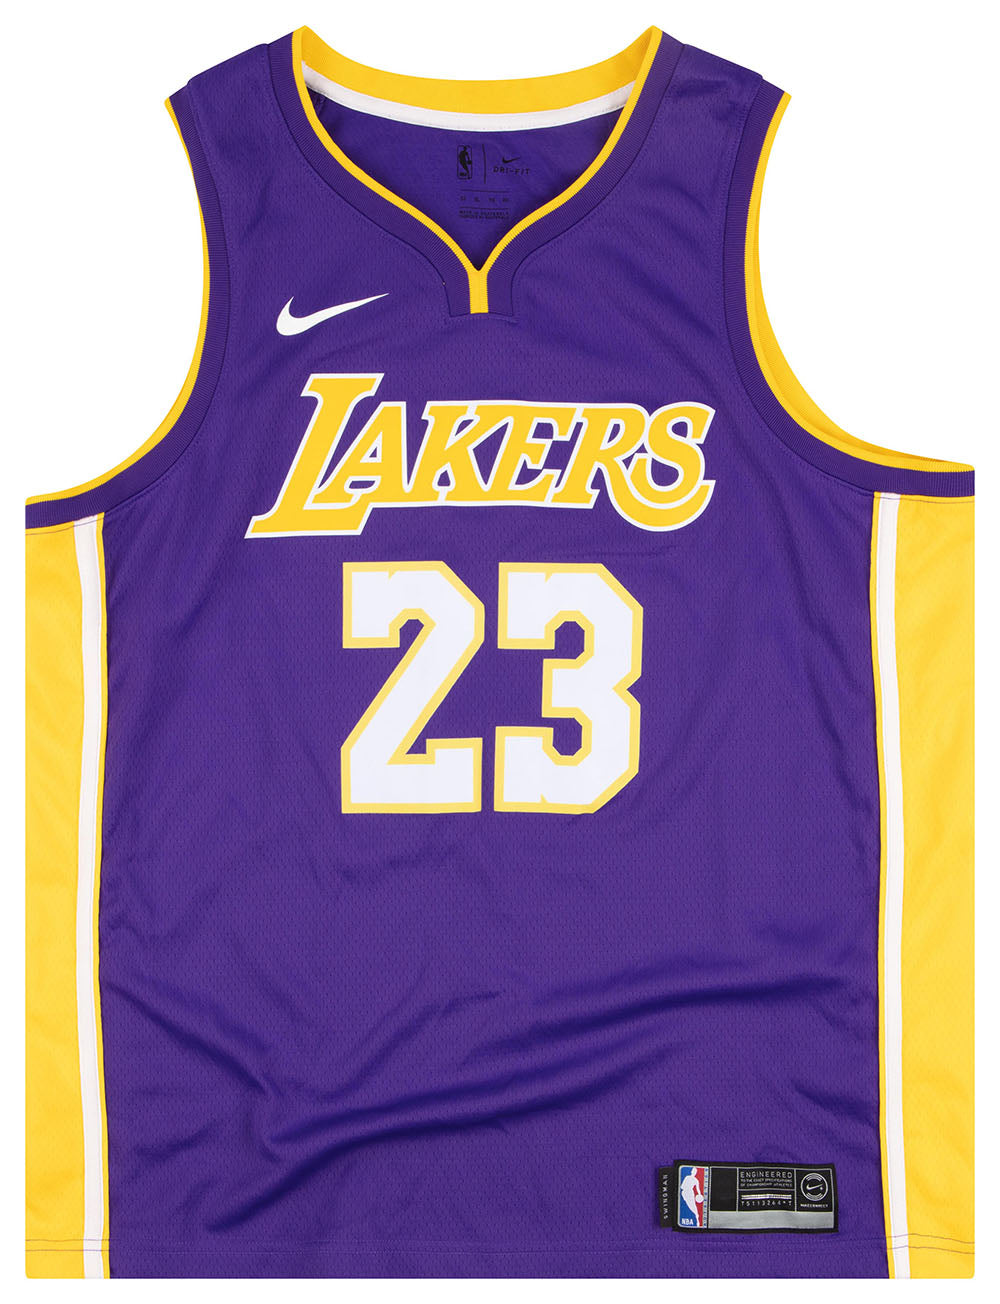 2017 lakers jersey